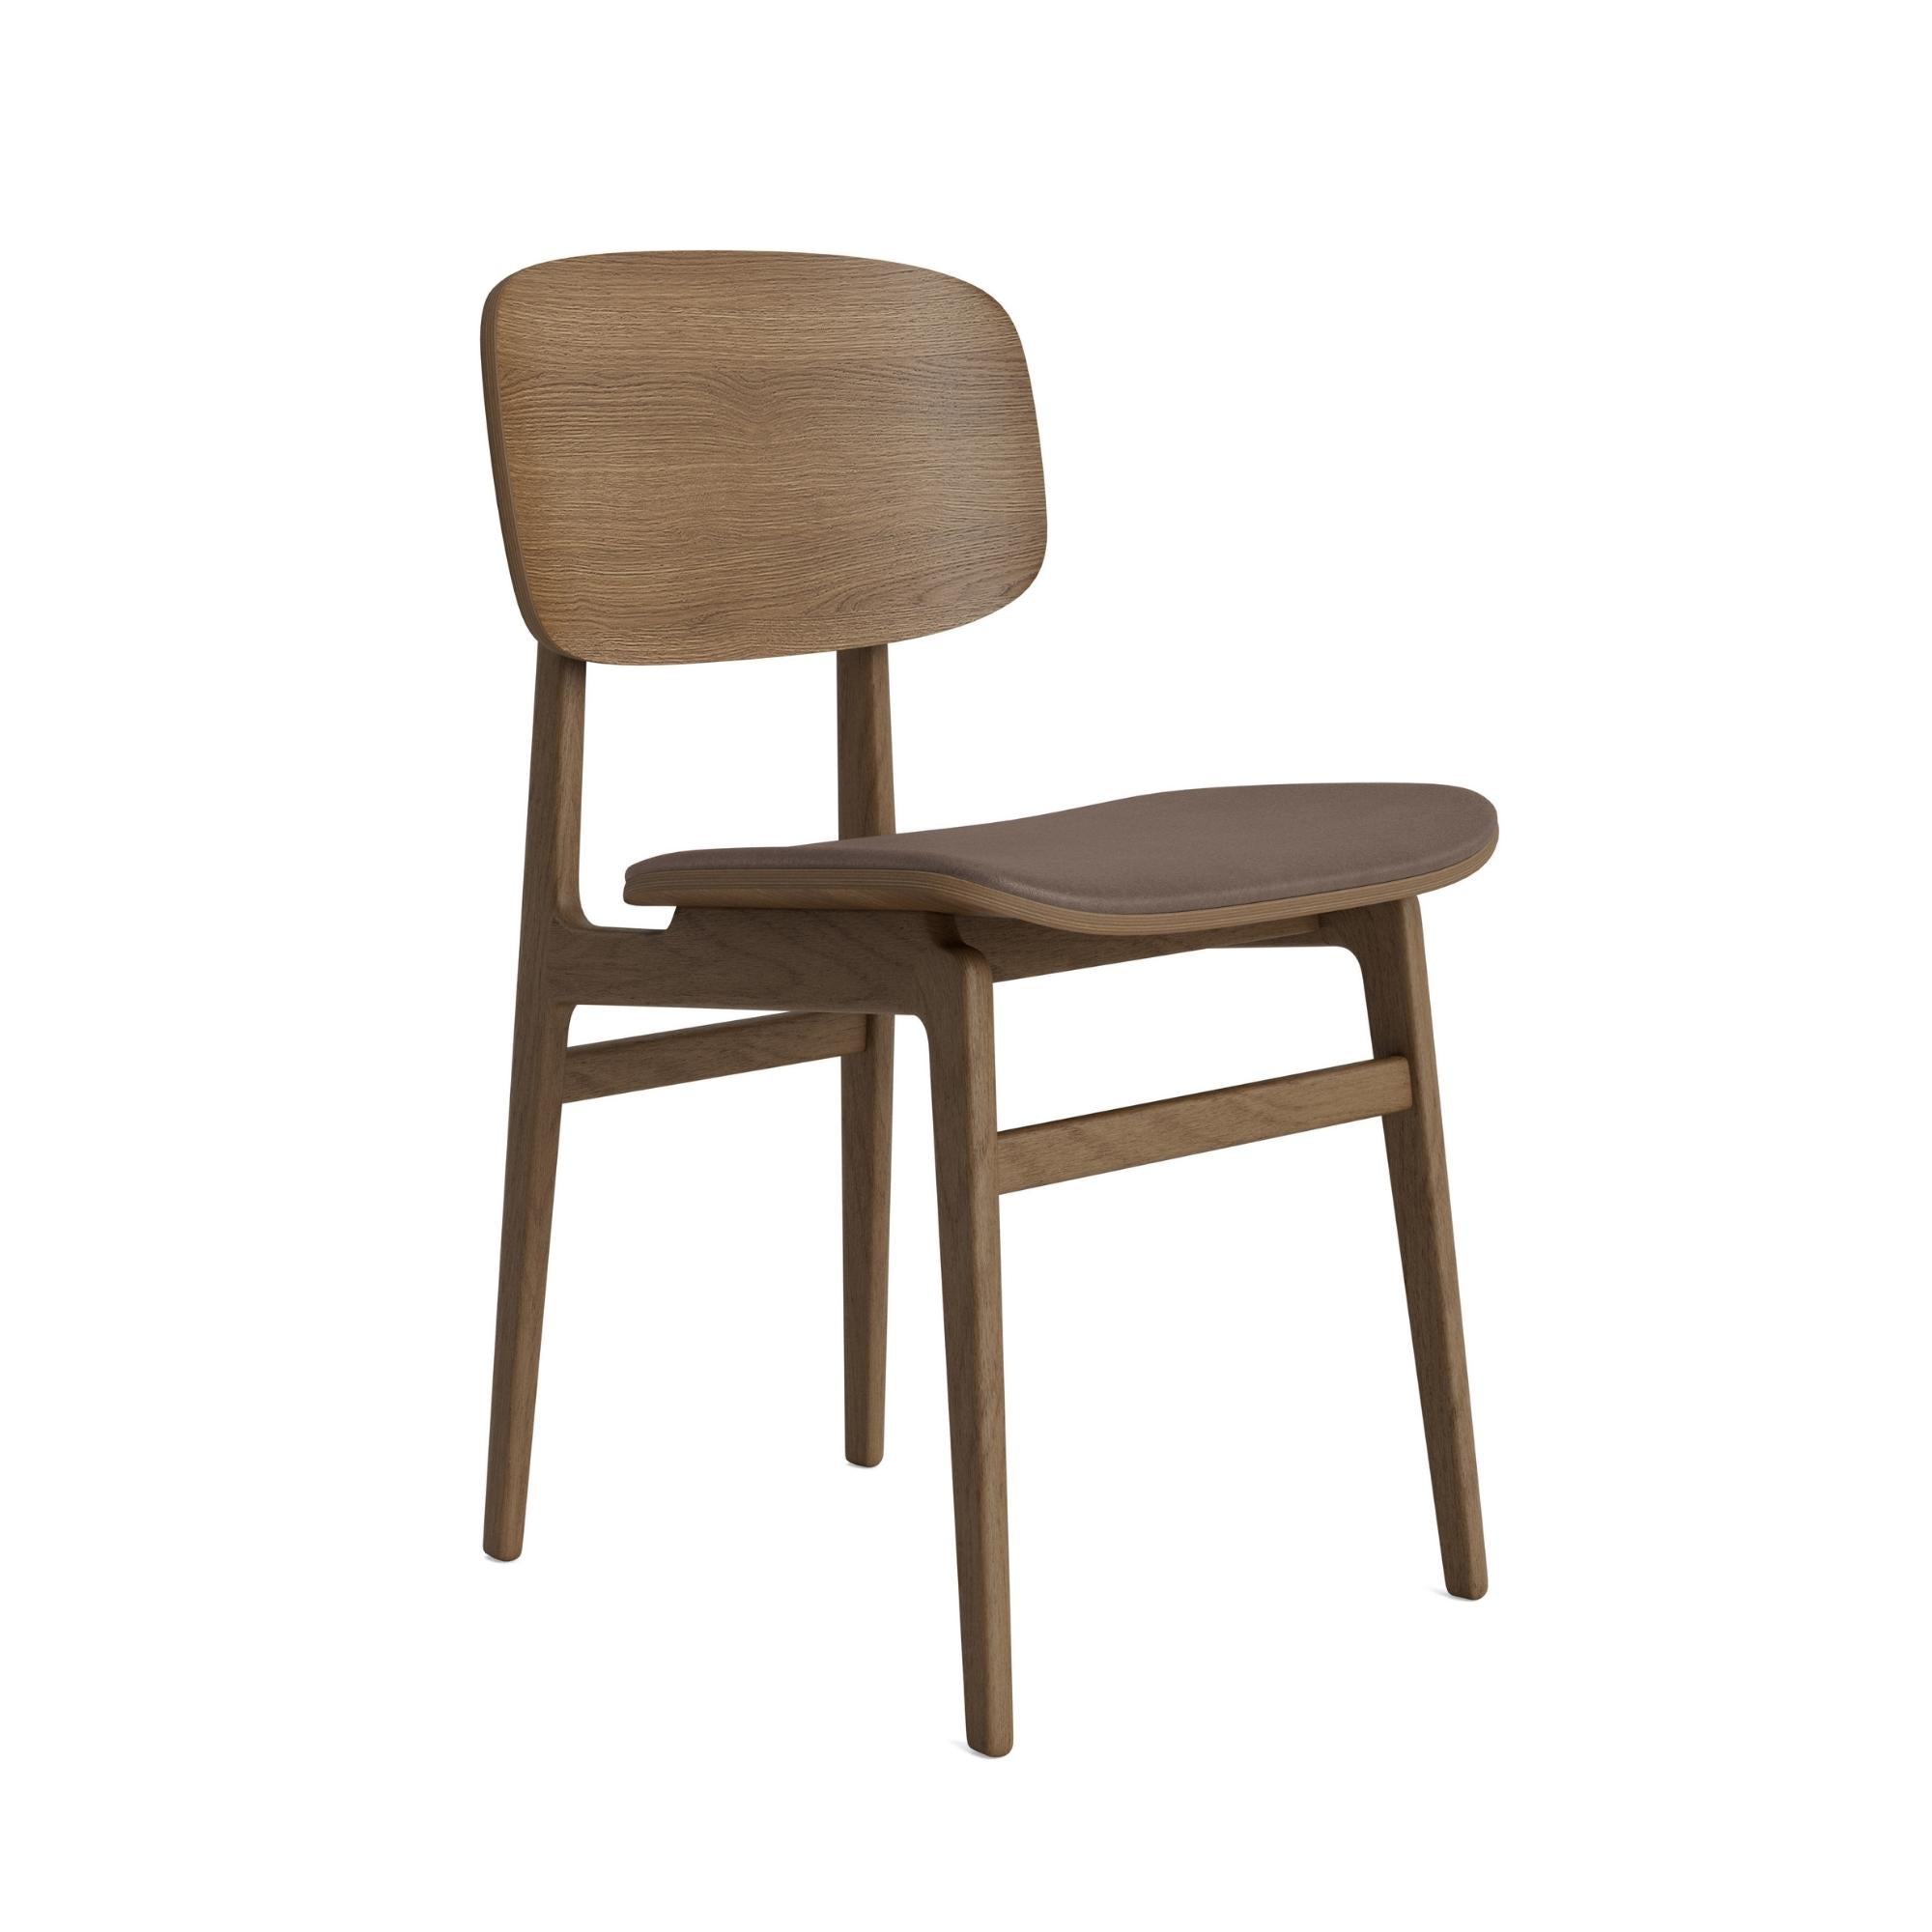 NY11 Chair - Leather Chair NORR11